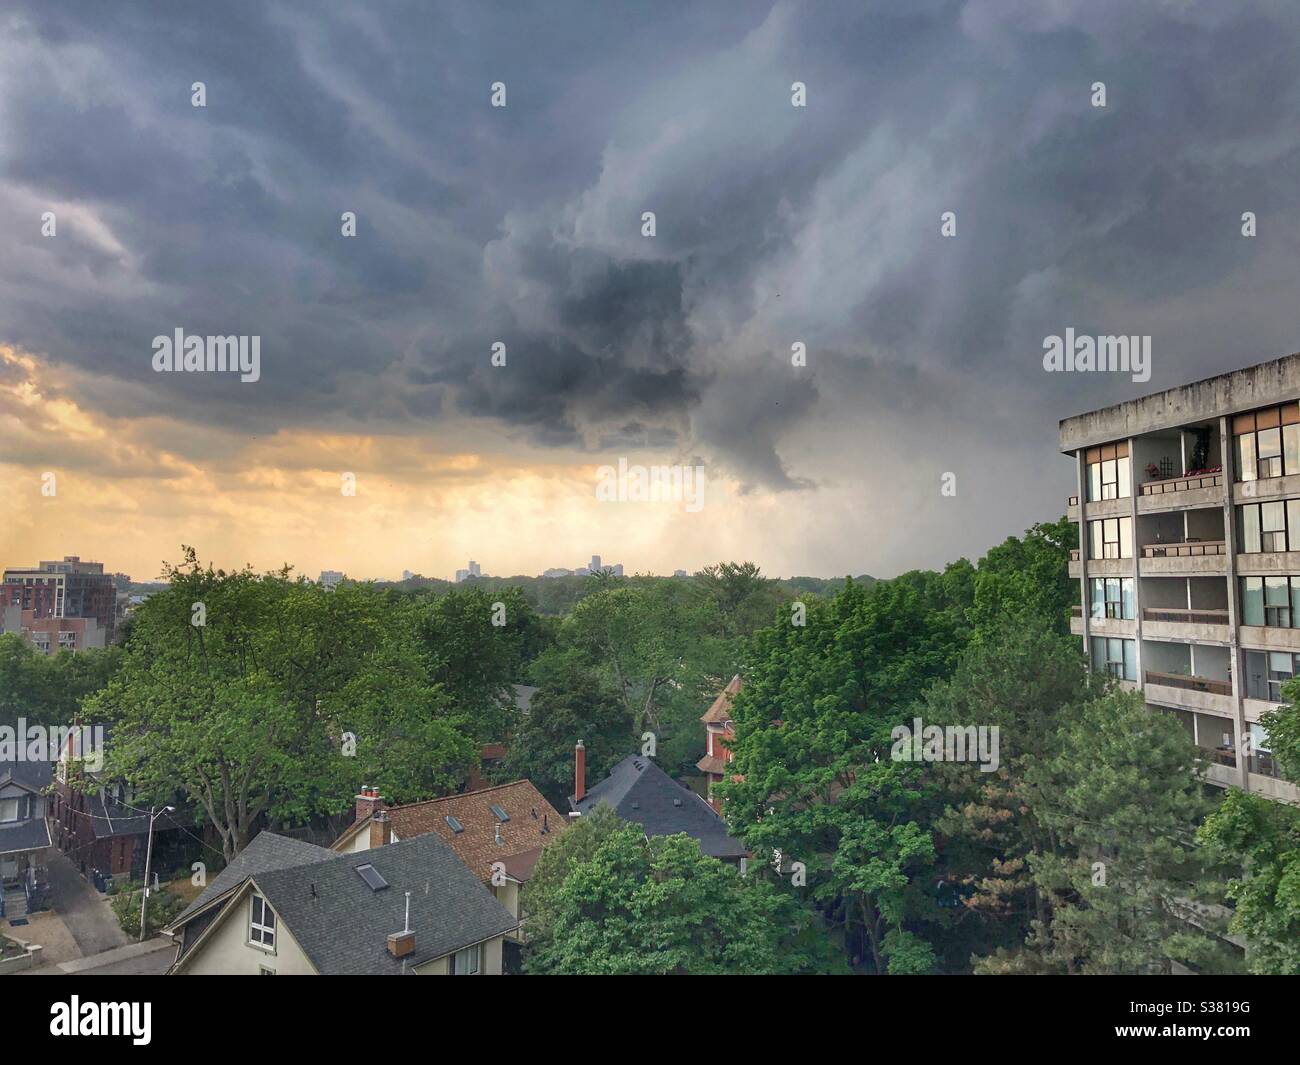 Storm clouds in Toronto, Canada. Stock Photo